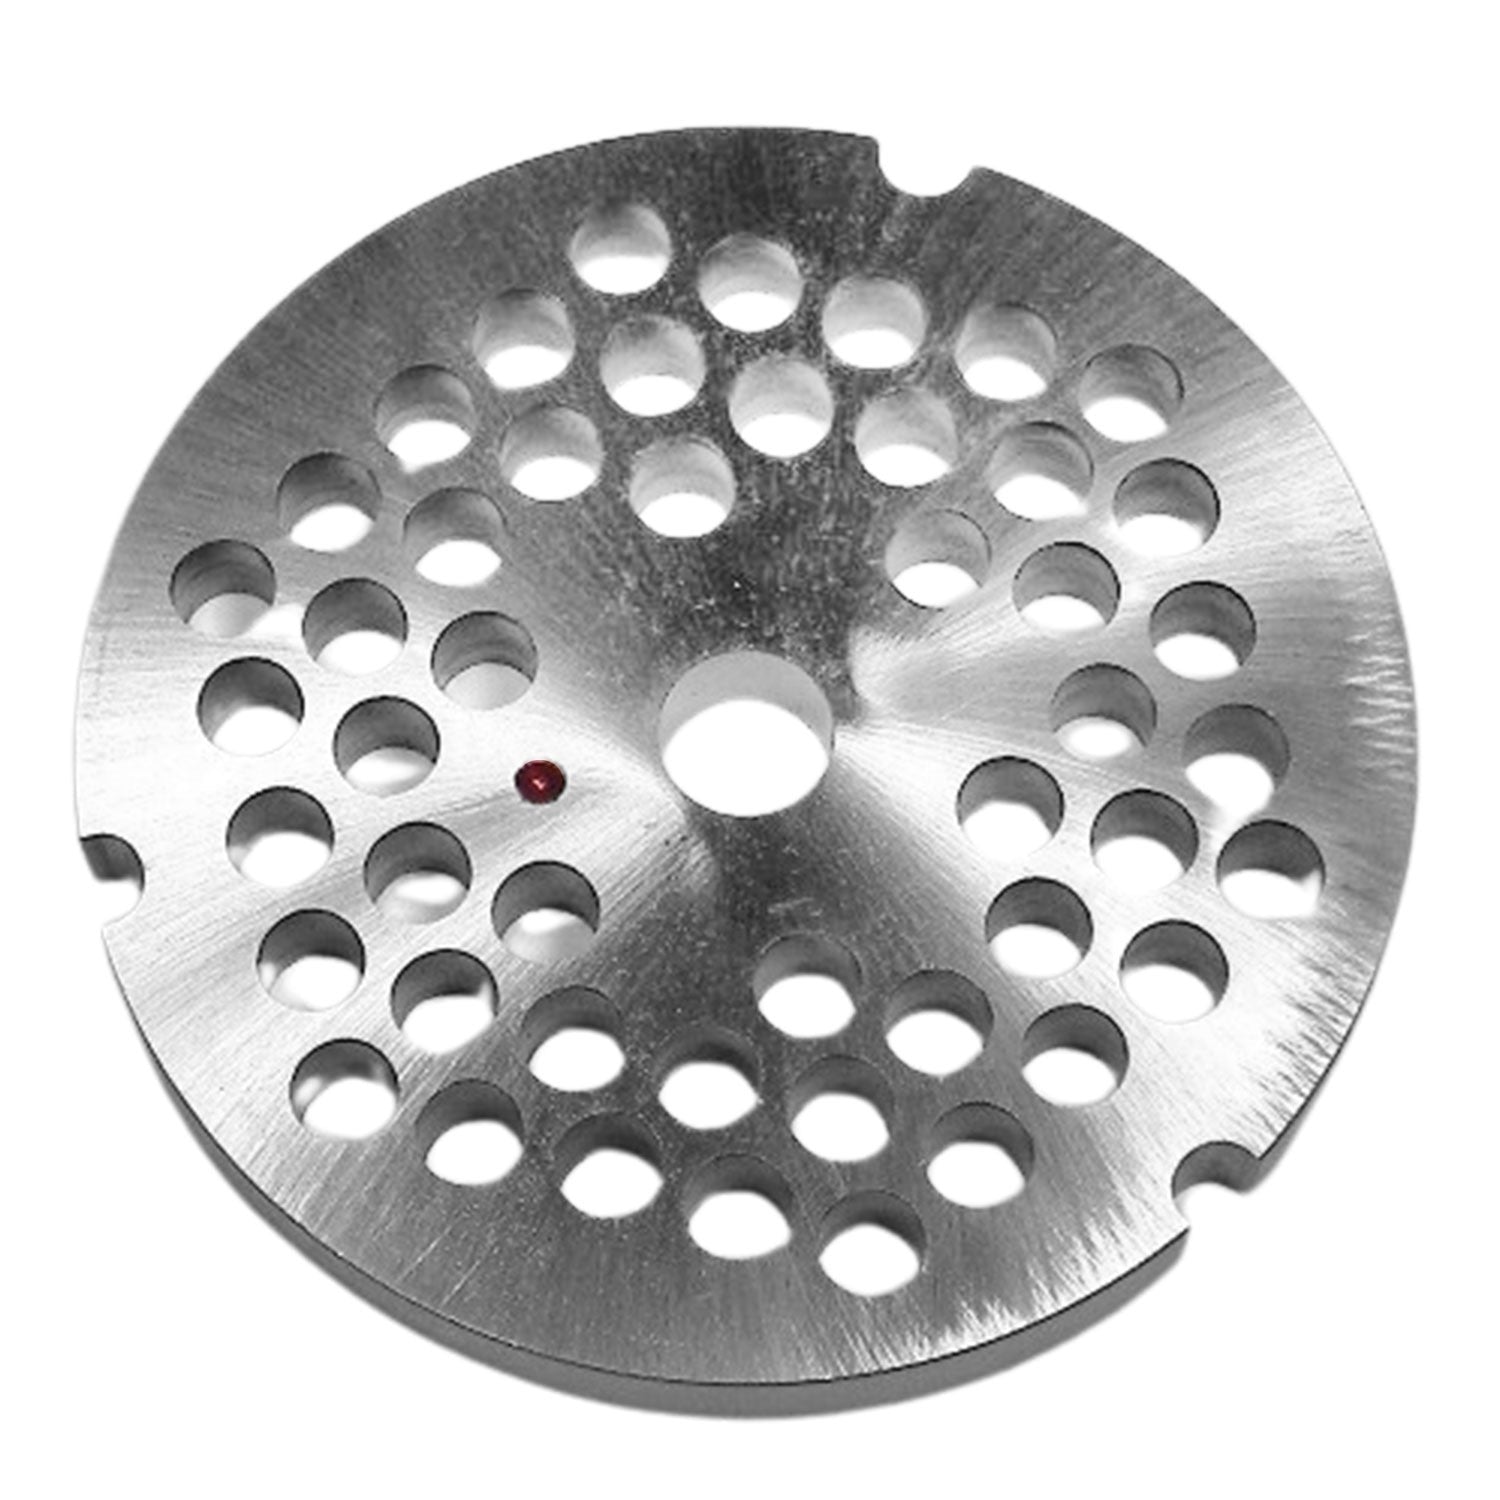 Size 32 DC Reversible Meat Grinder Plate, 5/16